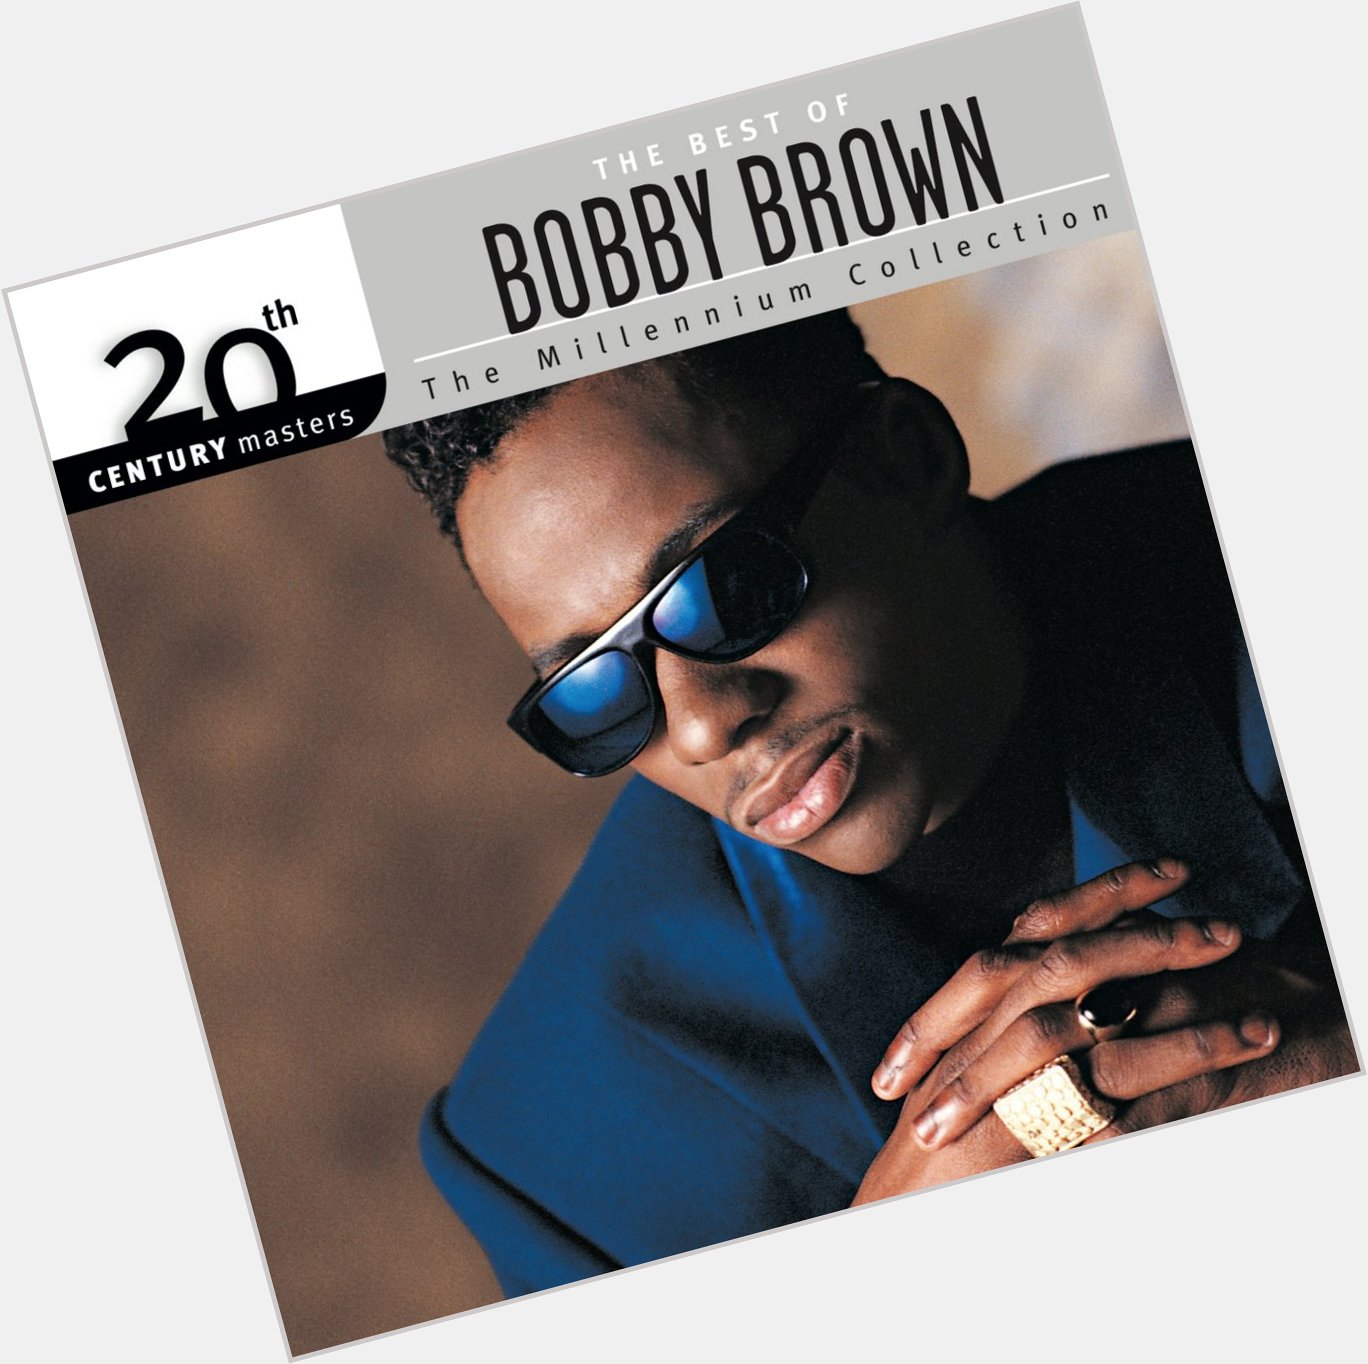 Happy Birthday, Bobby Brown. The only way to groove today:  